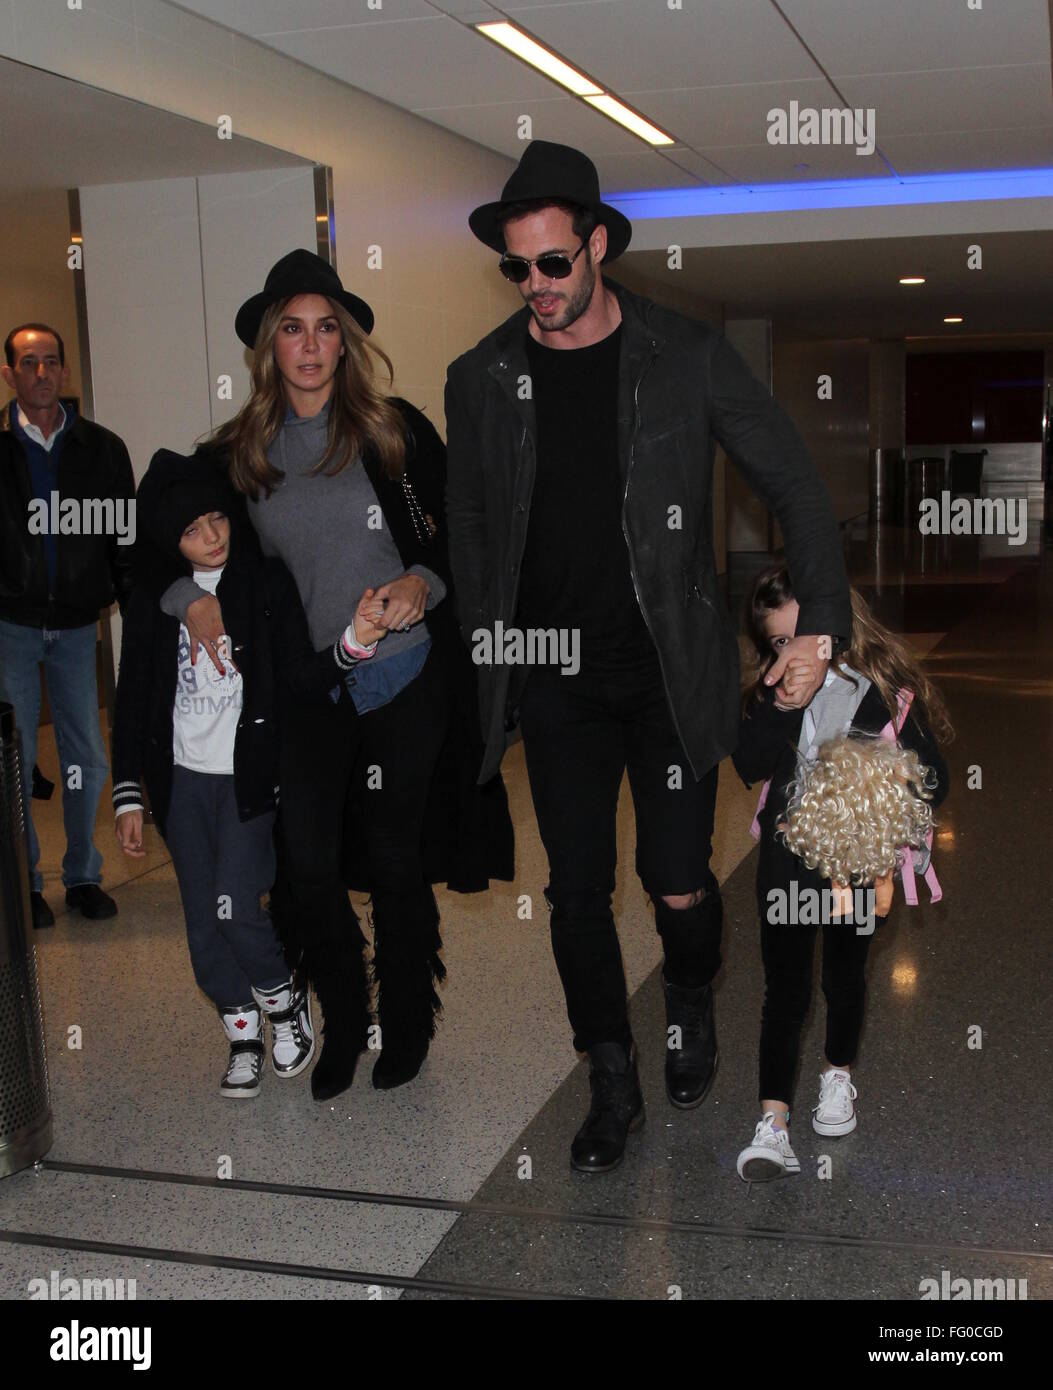 William Levy arrives at Los Angeles International Airport (LAX) with Elizabeth  Gutierrez and their children, Christopher and Kailey Featuring: William Levy,  Elizabeth Gutiérrez, Christopher Alexander Levy, Kailey Alexandra Levy  Where: Los Angeles,